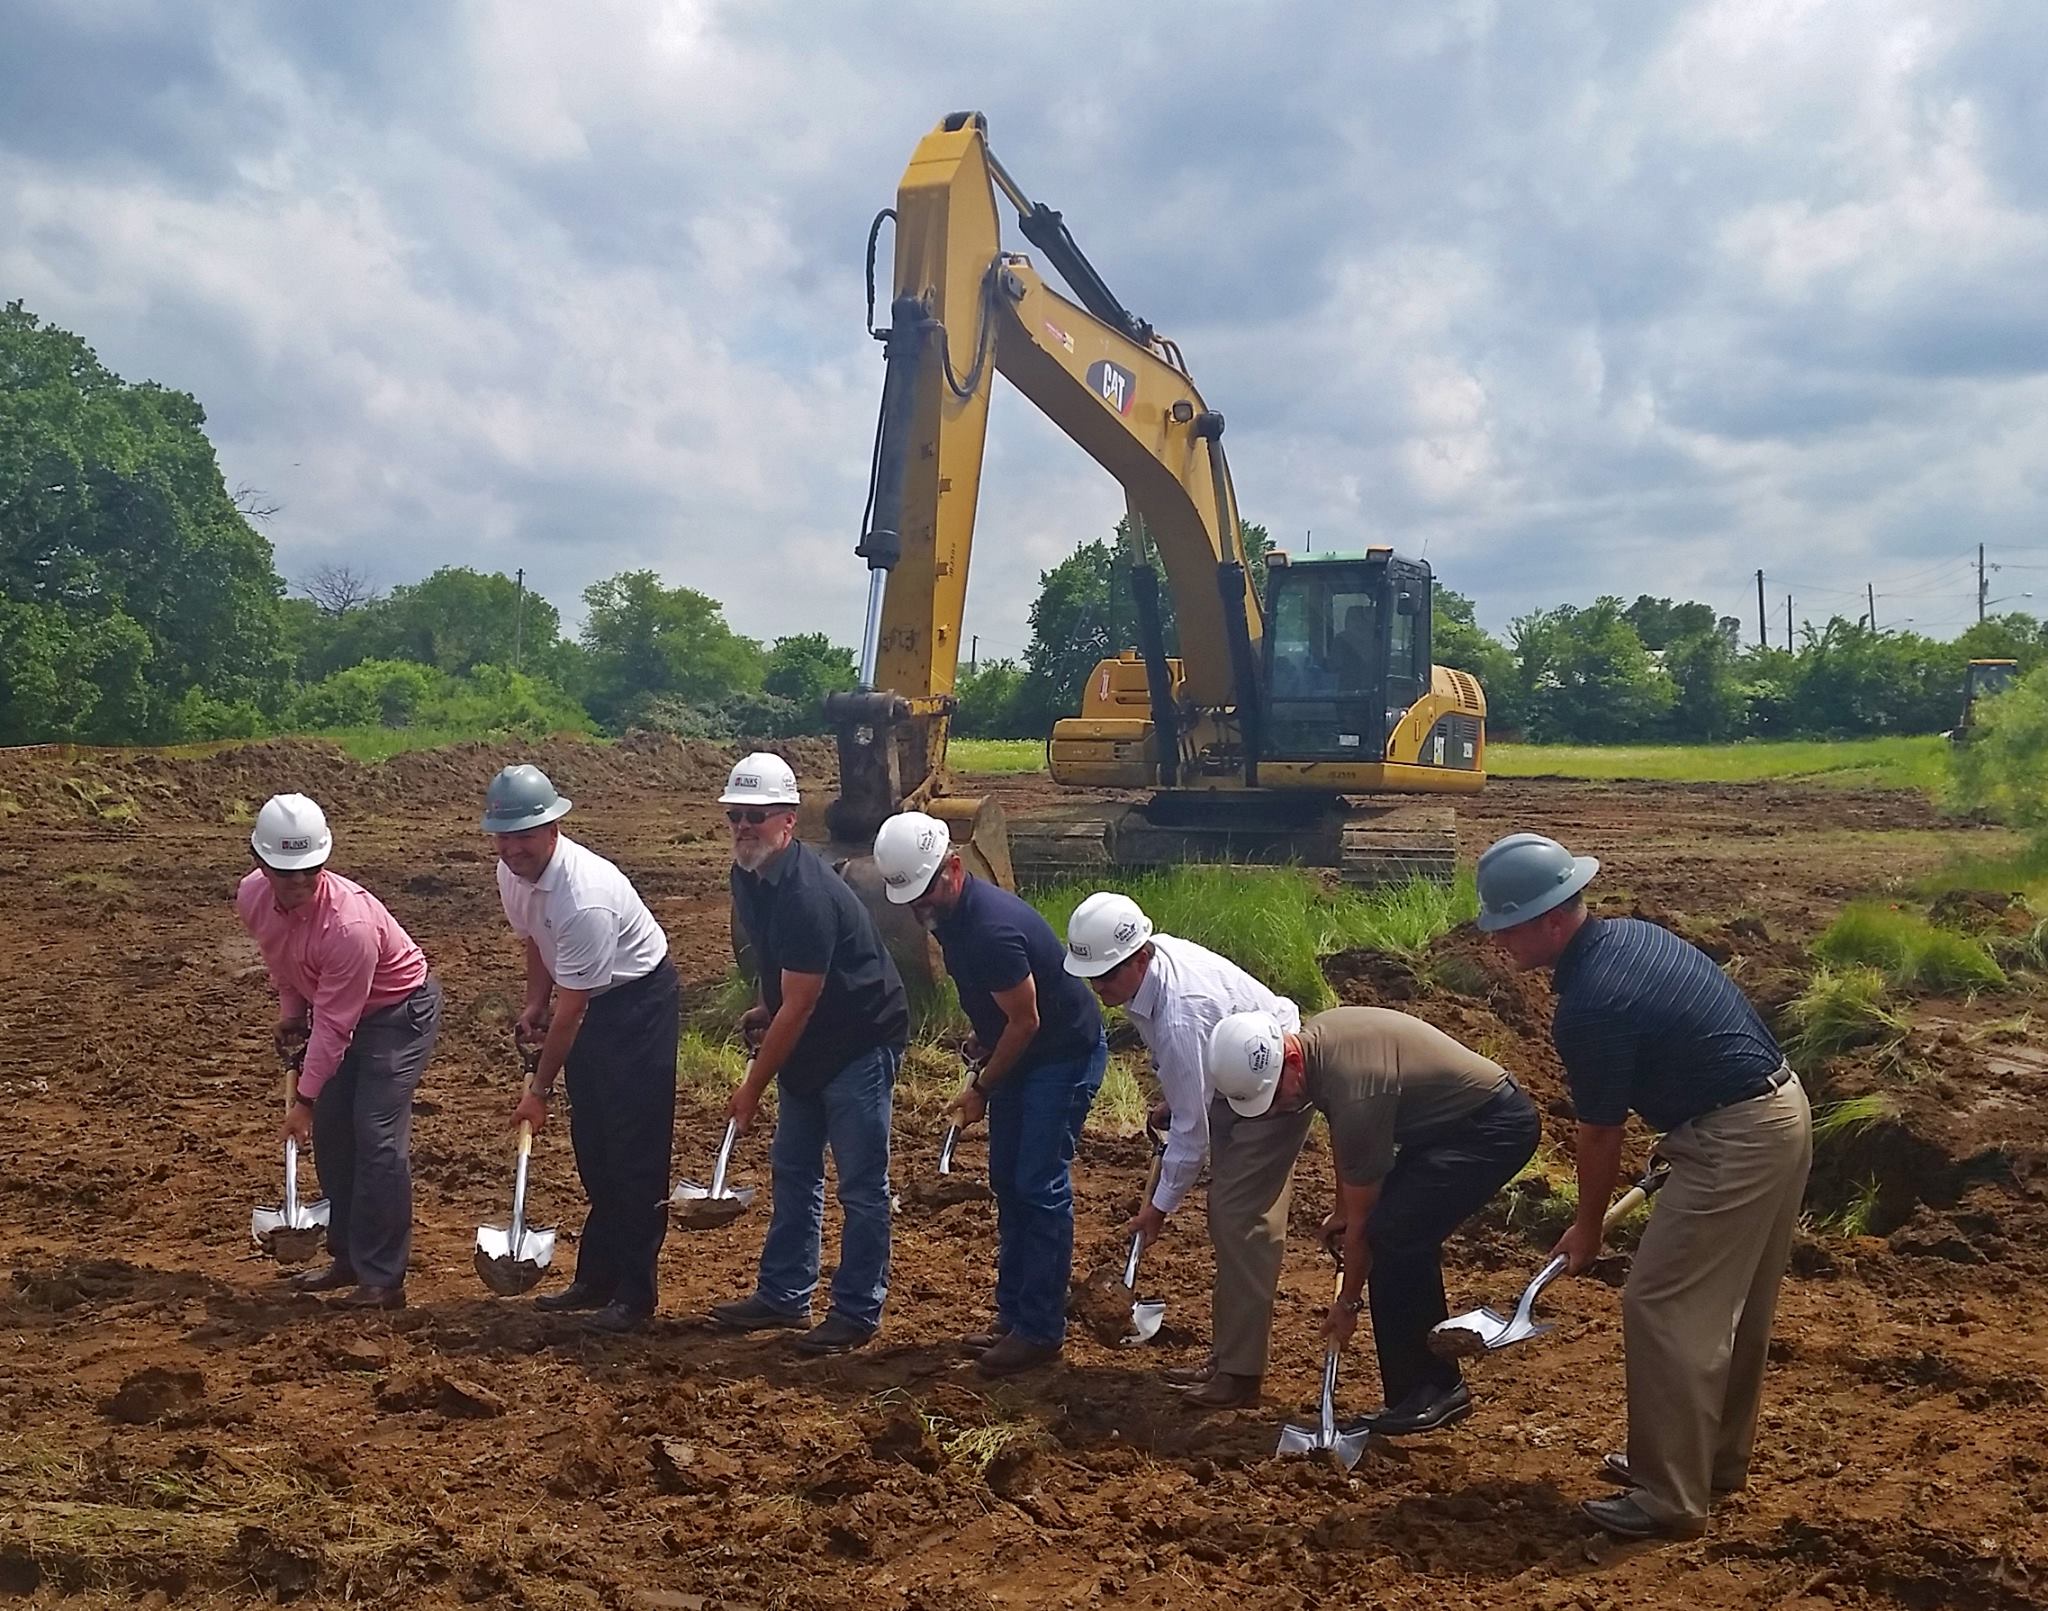 The groundbreaking at the new Little Guys Denton location